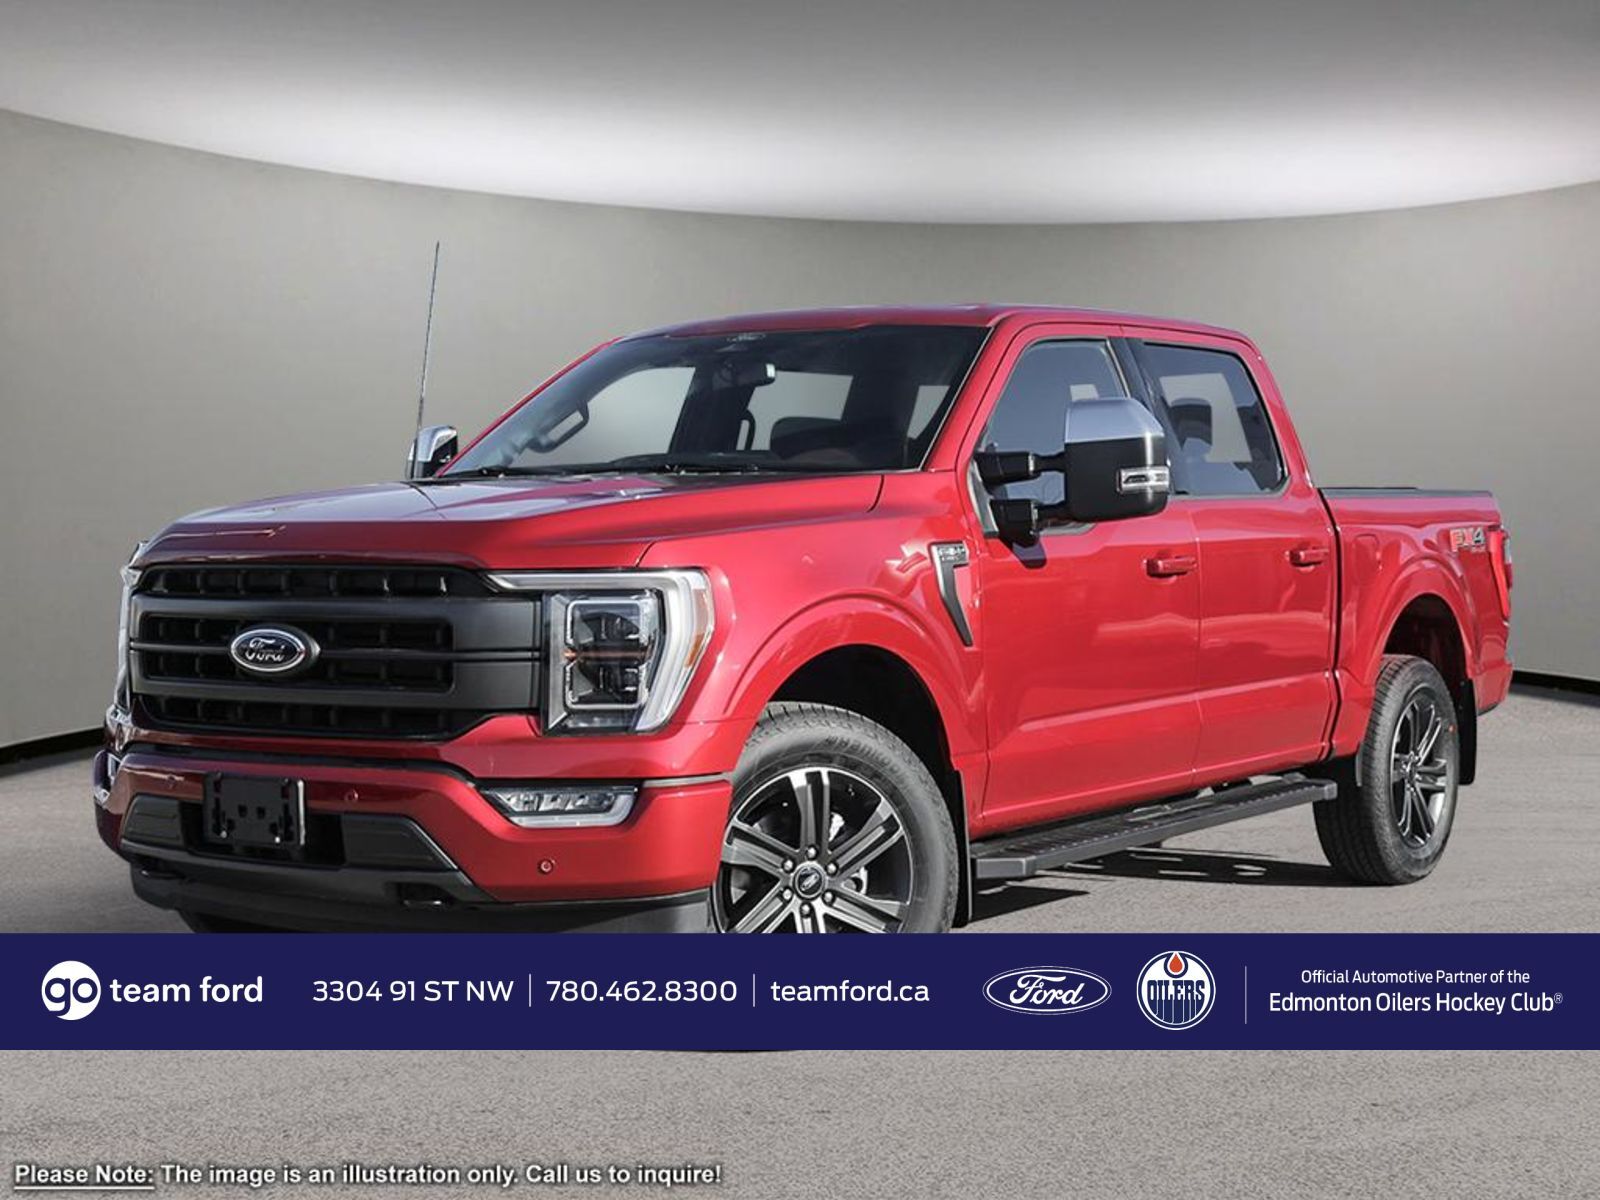 2023 Ford F-150 3.5L, V6 ECOBOOST ENG, LARIAT, FORD COPILOT, TWIN 